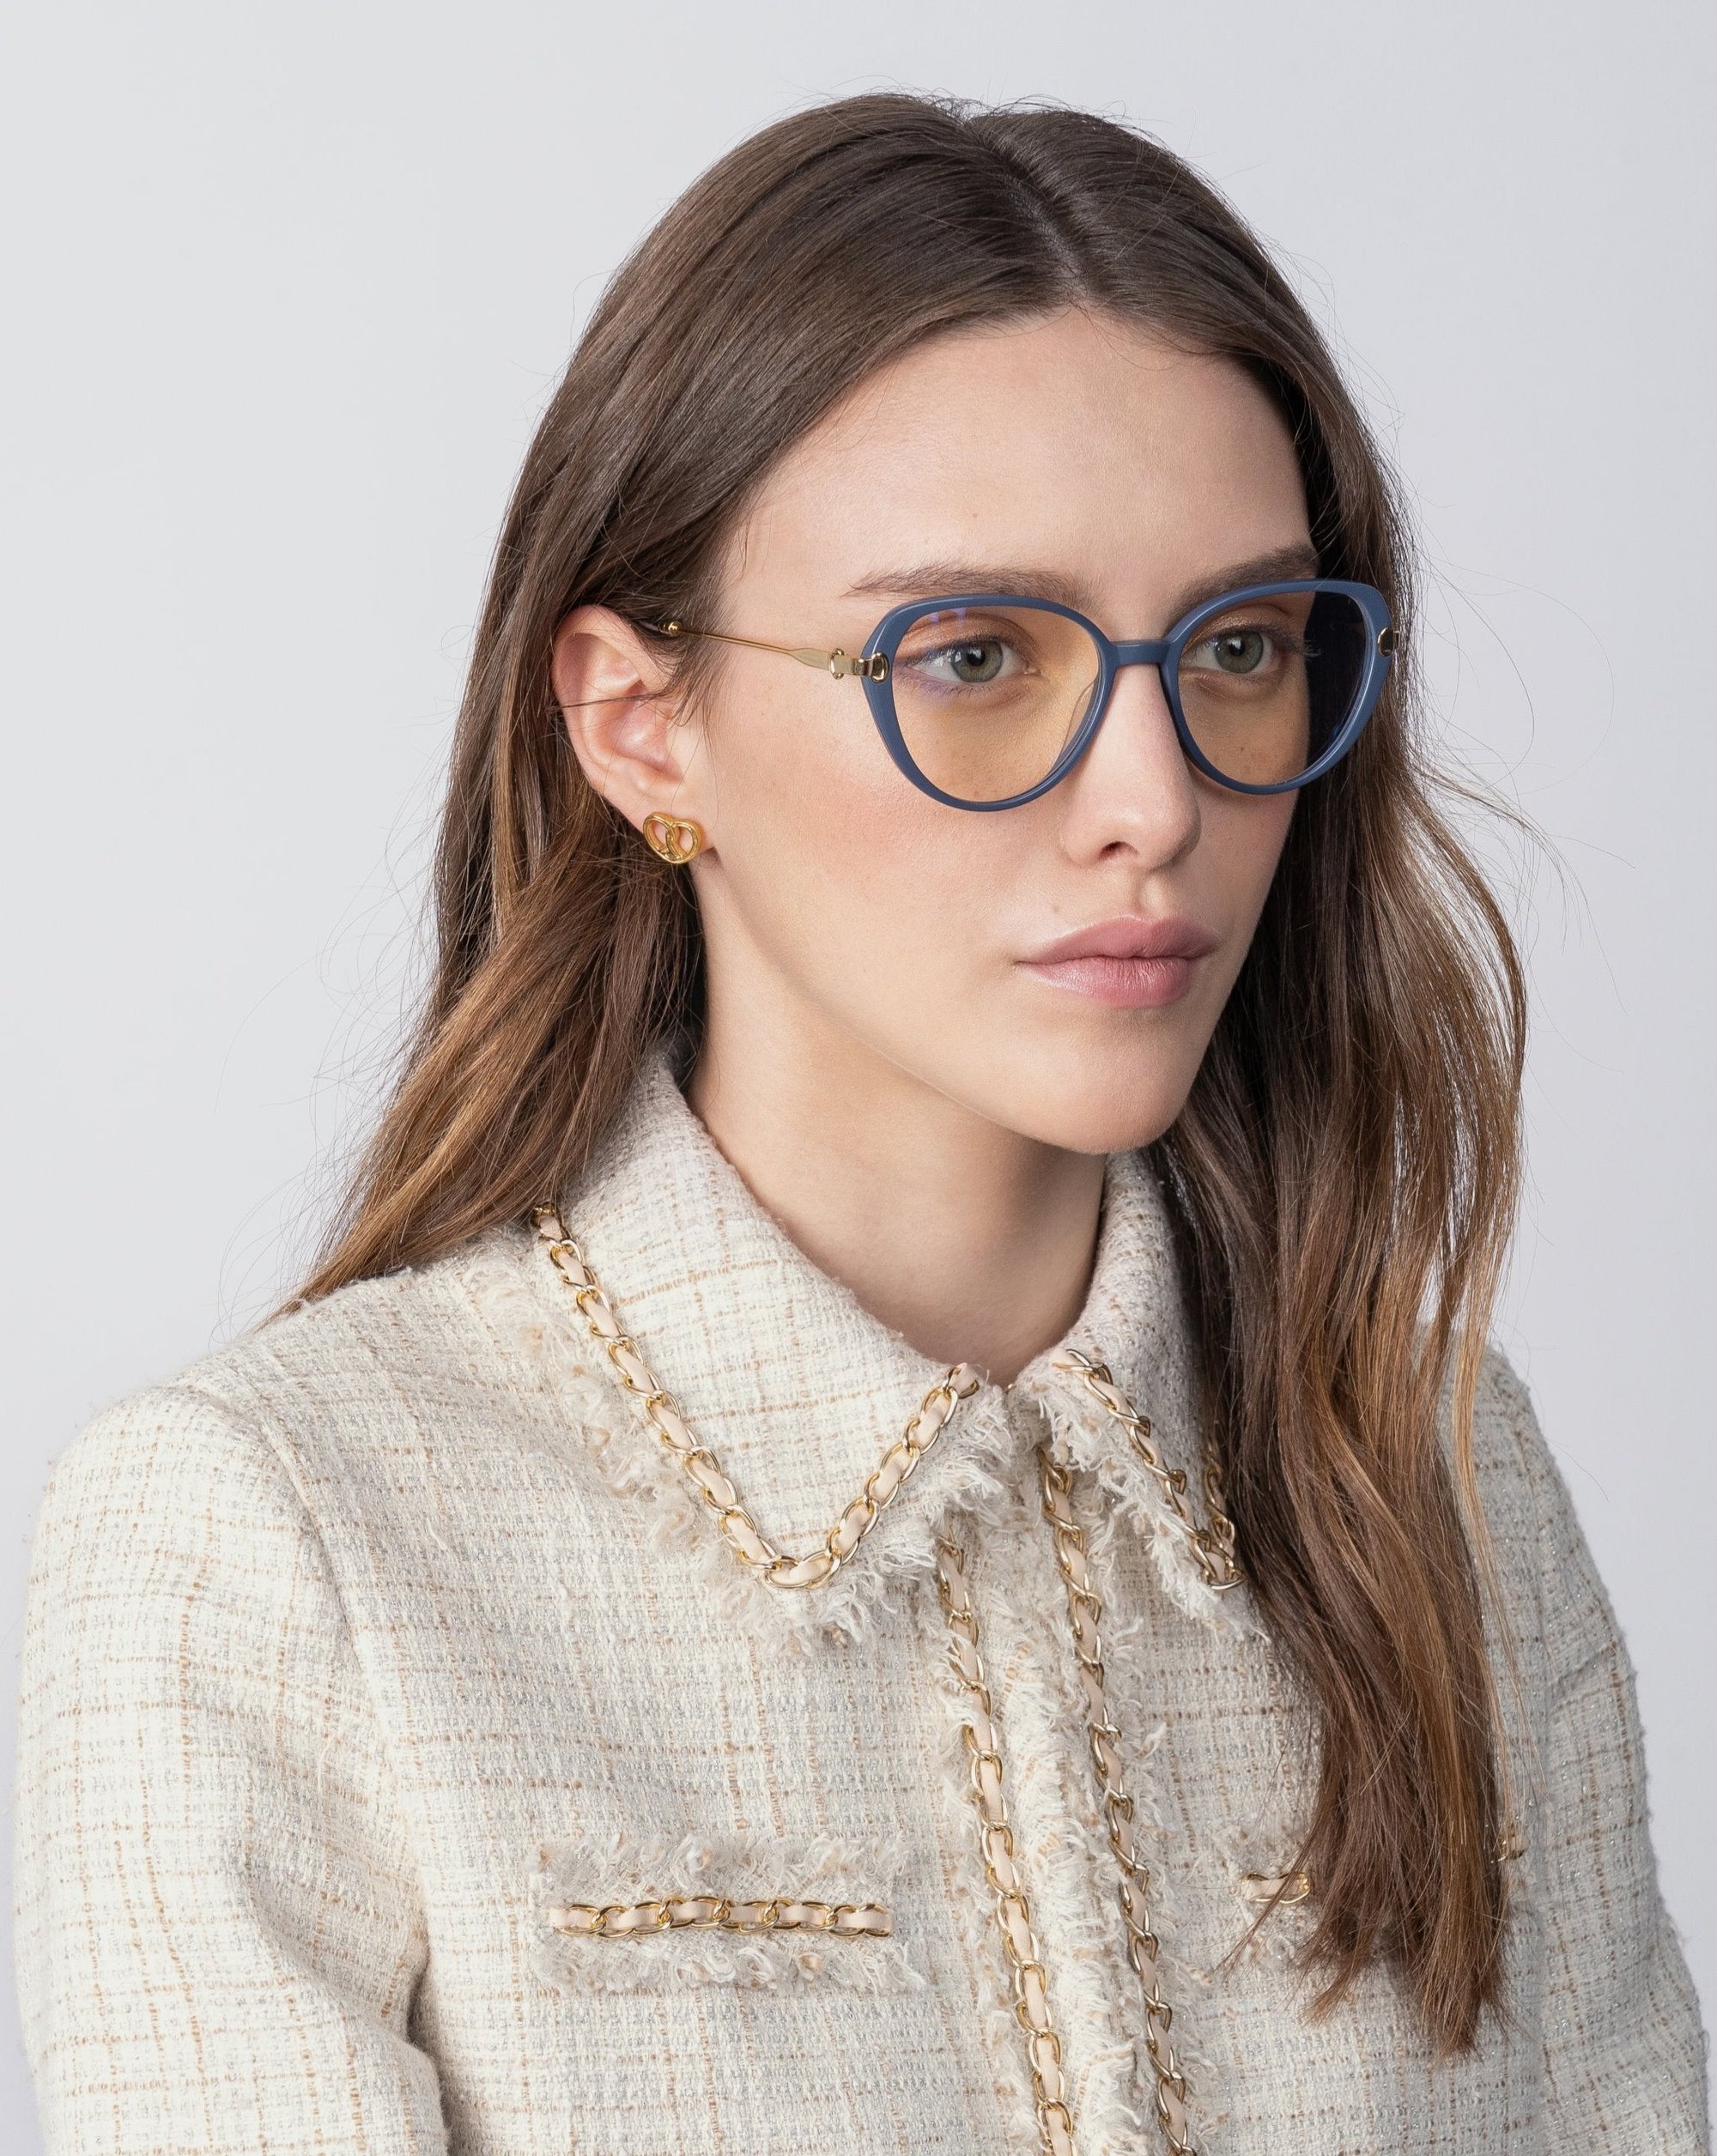 A person with light skin and long, brown hair is wearing round blue Waterhouse glasses with prescription lenses and gold earrings by For Art's Sake®. They have on a textured, off-white blazer with 18-karat gold-plated chain details and a high collar. The background is plain and light in color.